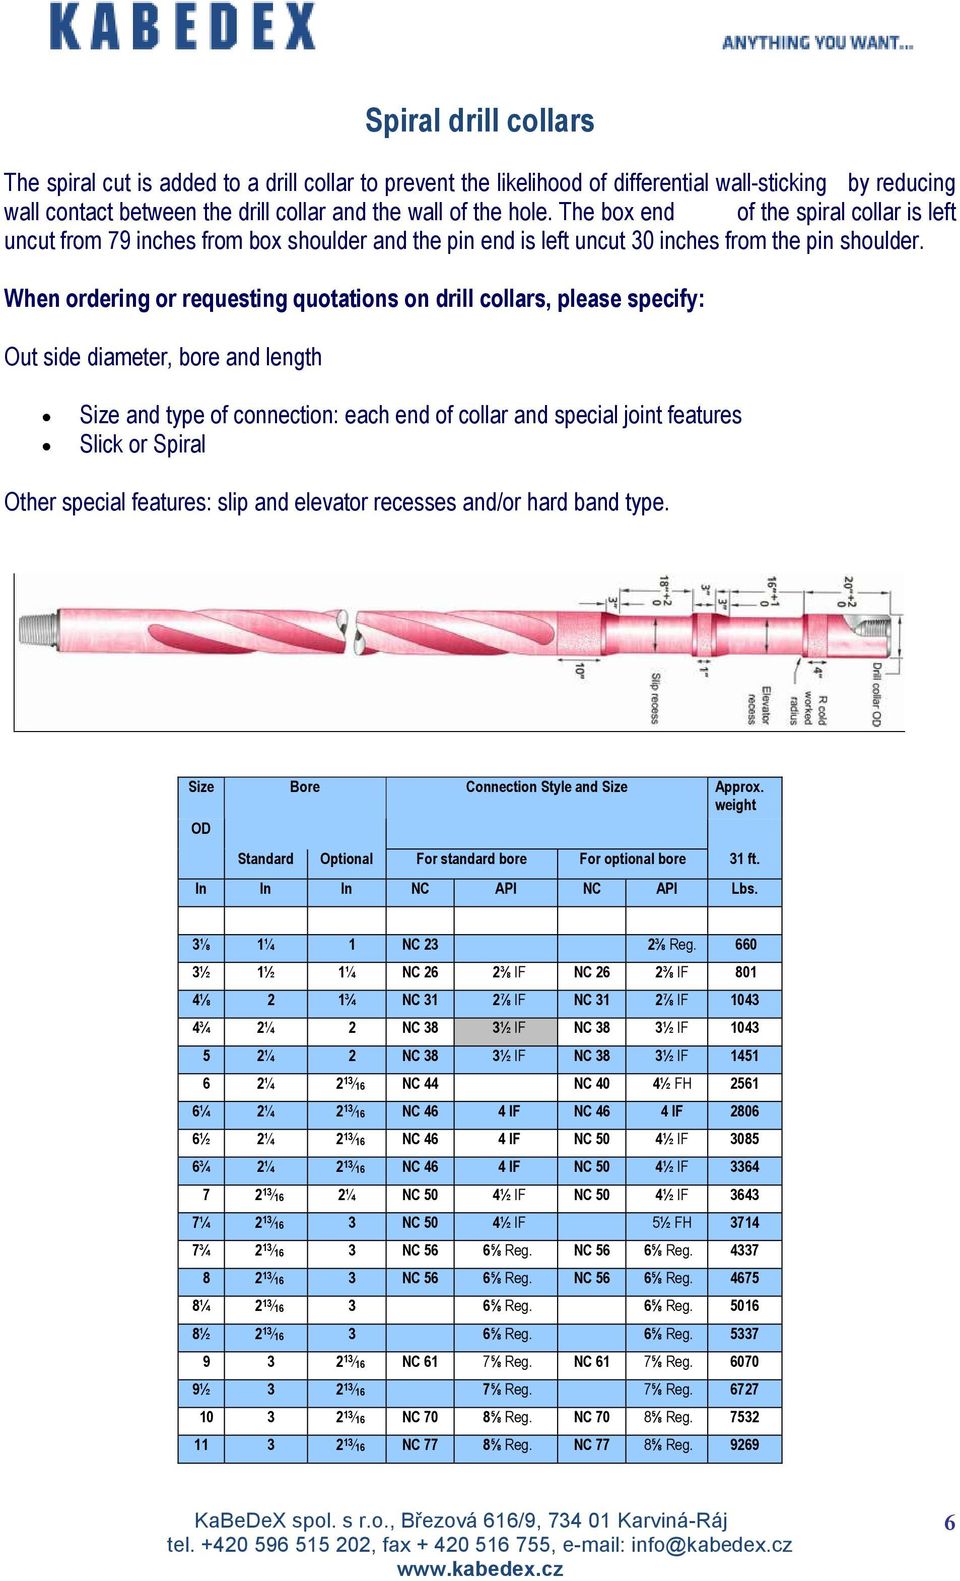 When ordering or requesting quotations on drill collars, please specify: Out side diameter, bore and length Size and type of connection: each end of collar and special joint features Slick or Spiral